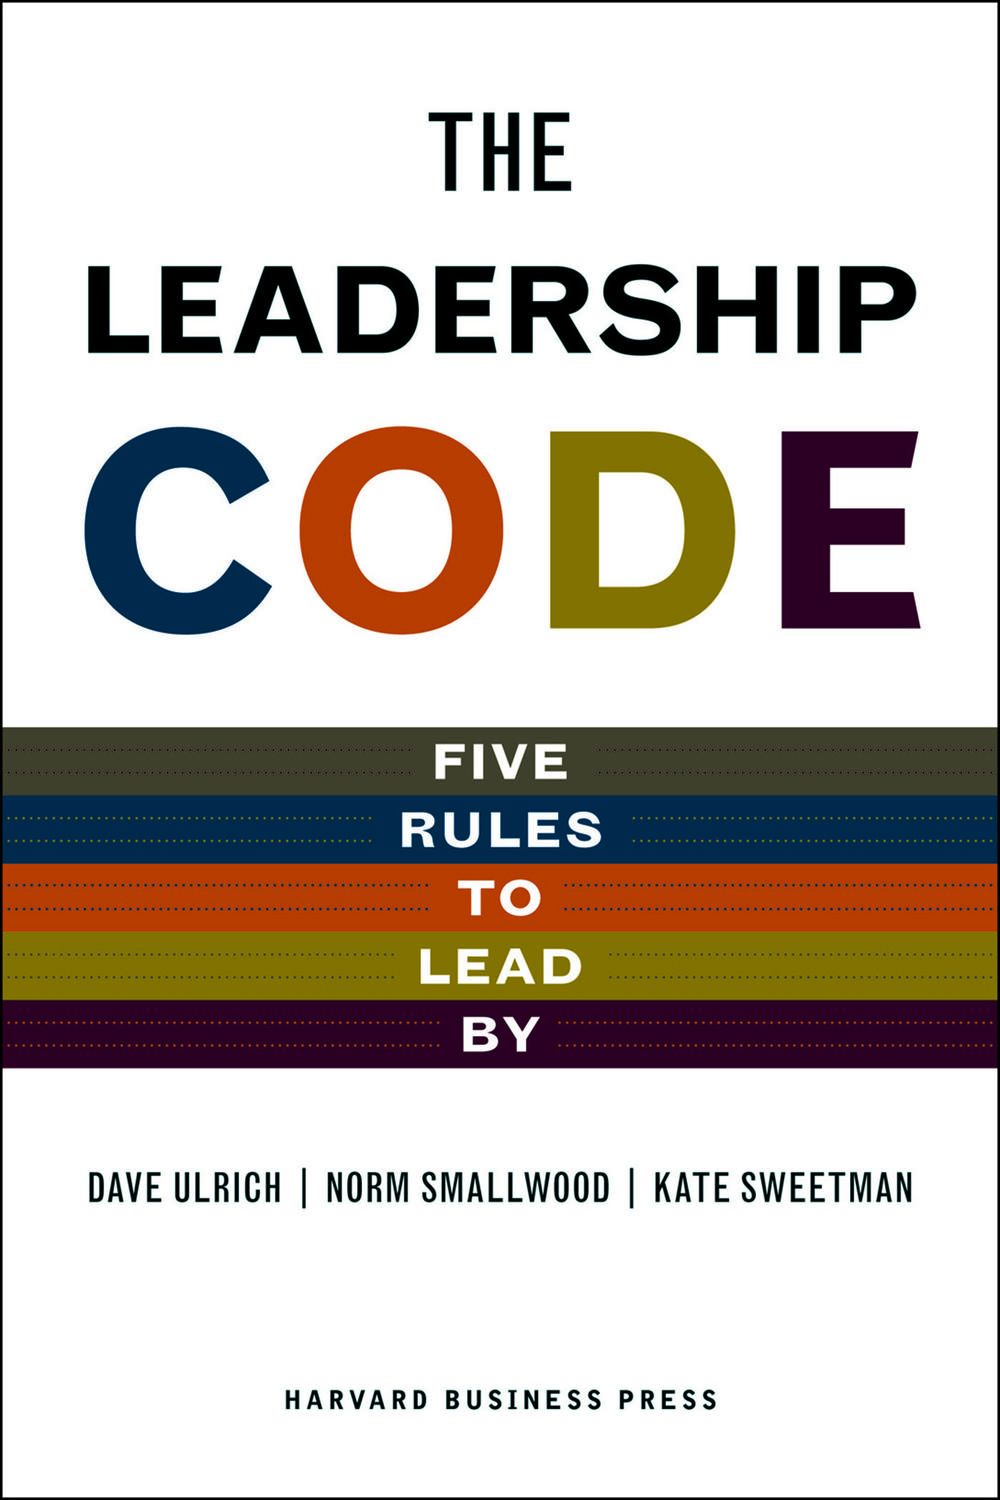 The Leadership Code - Dave Ulrich, Norm Smallwood, Kate Sweetman